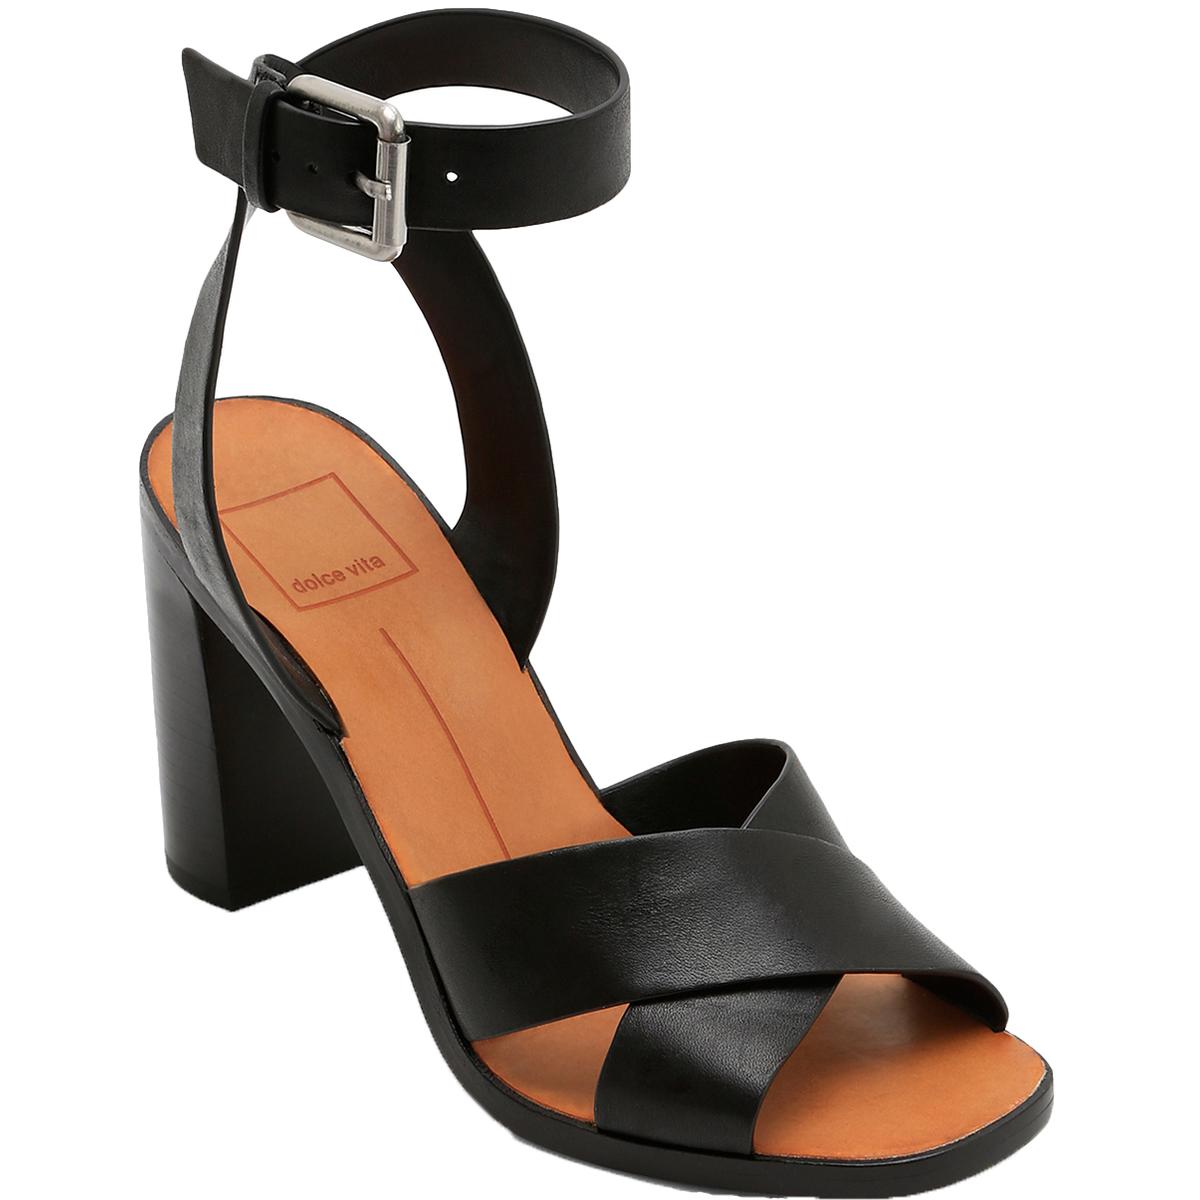 Dolce Vita Womens Nala Leather Ankle Strap Dress Sandals Shoes BHFO 7298